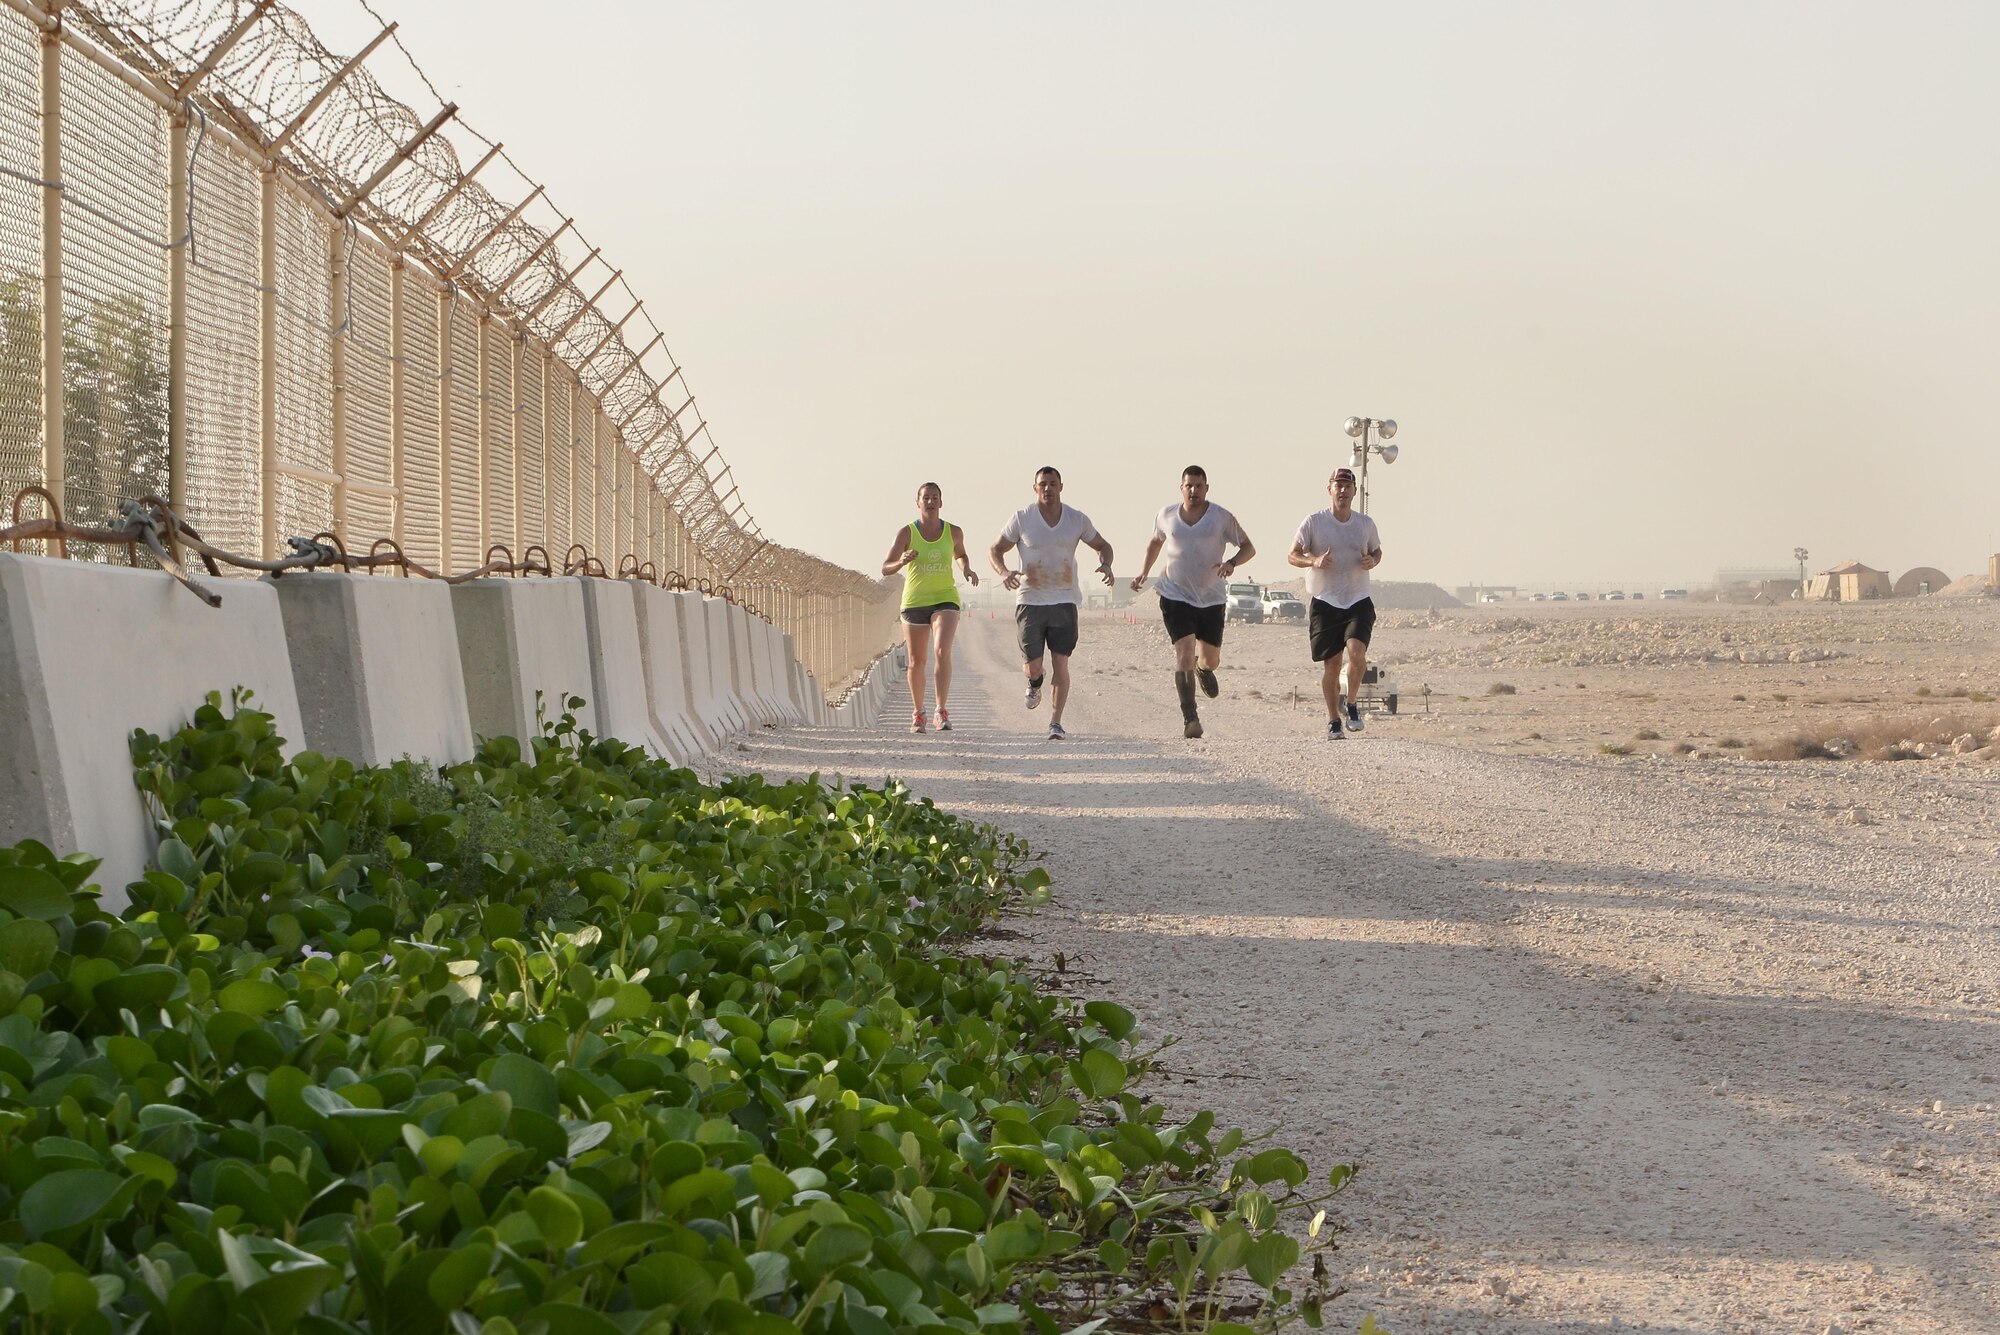 Diversity Day Mud Run participants run to the next section of a two mile course September 20, 2015 at Al Udeid Air Base, Qatar. The mud run challenged 106 runners with several obstacles from low crawling, T-wall climbing, barrier hurdles, and a Ôdeep freezeÕ cold mud pool. The event was held to help spread the word of Diversity Day, an initiative started by the Department of Defense for diversity events held throughout the year. (U.S. Air Force photo/ Staff Sgt. Alexandre Montes)